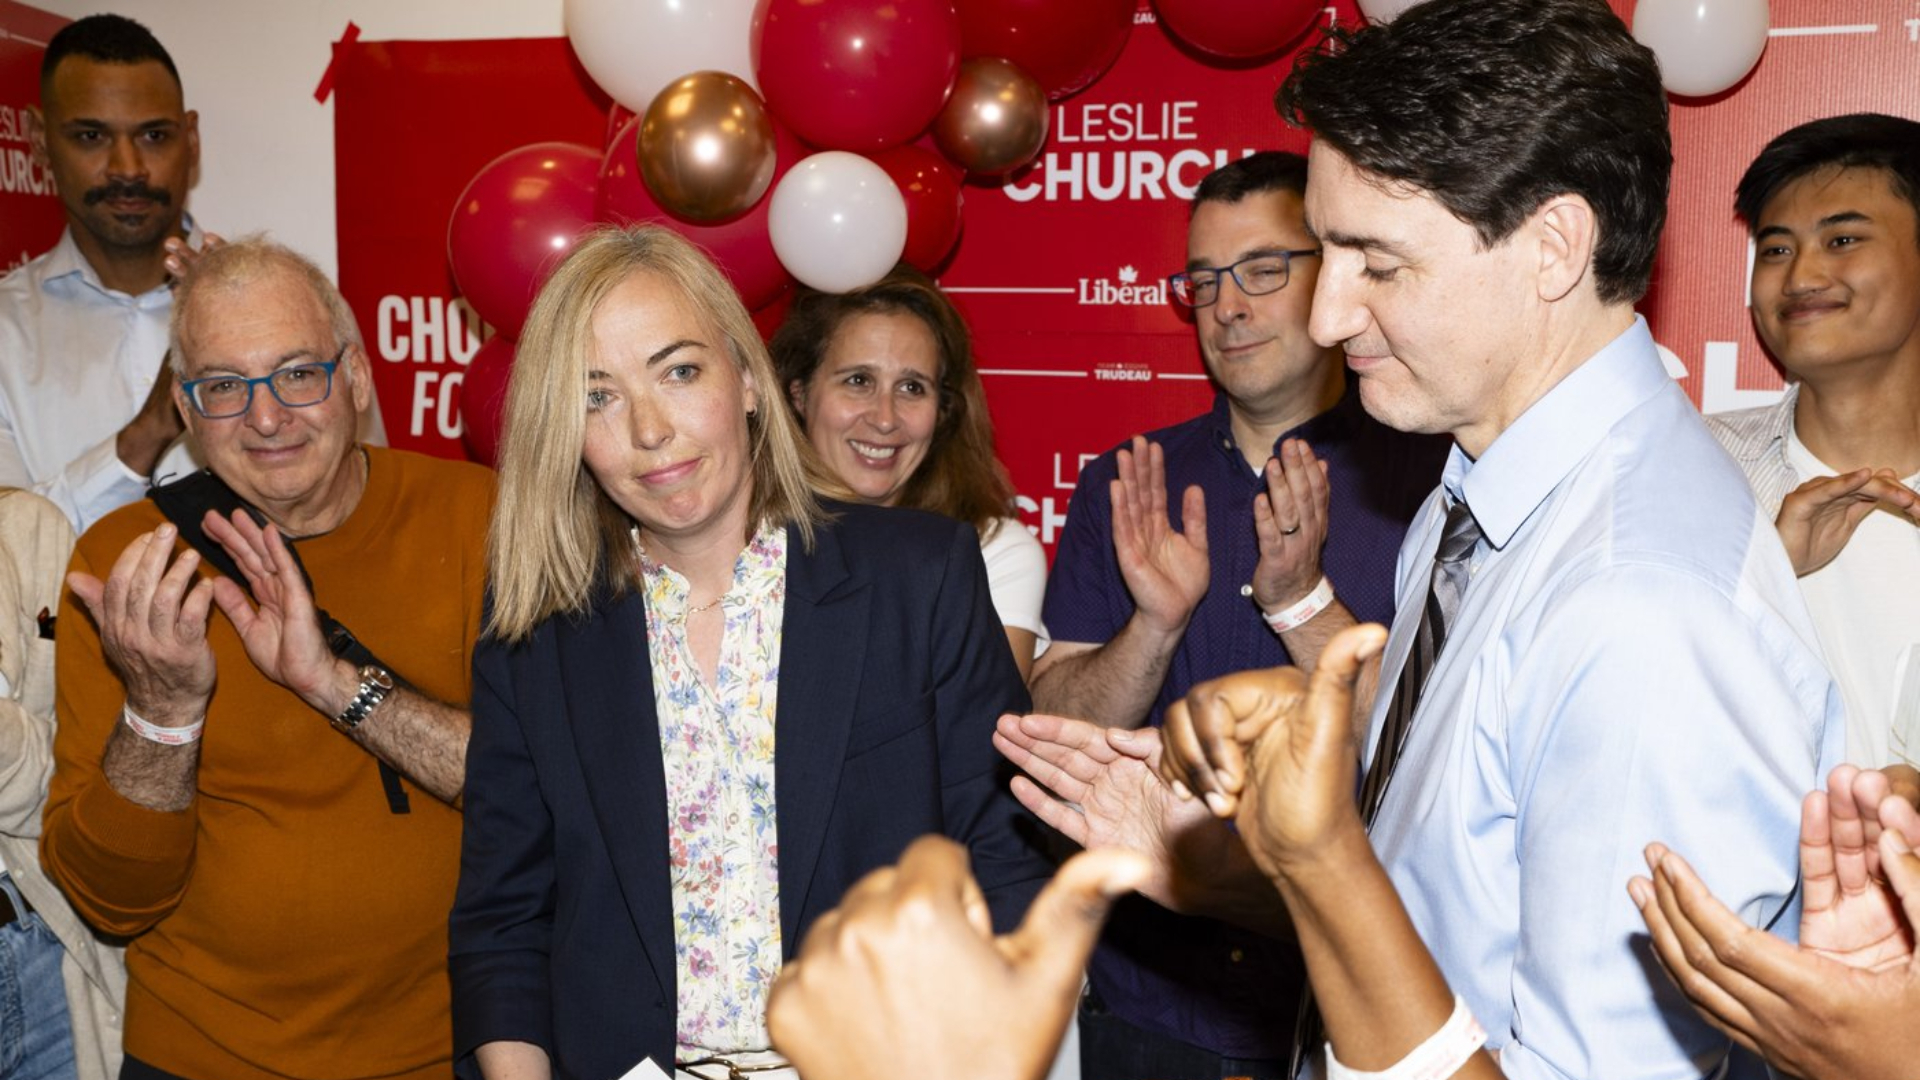 Byelection could intensify calls for Trudeau to quit